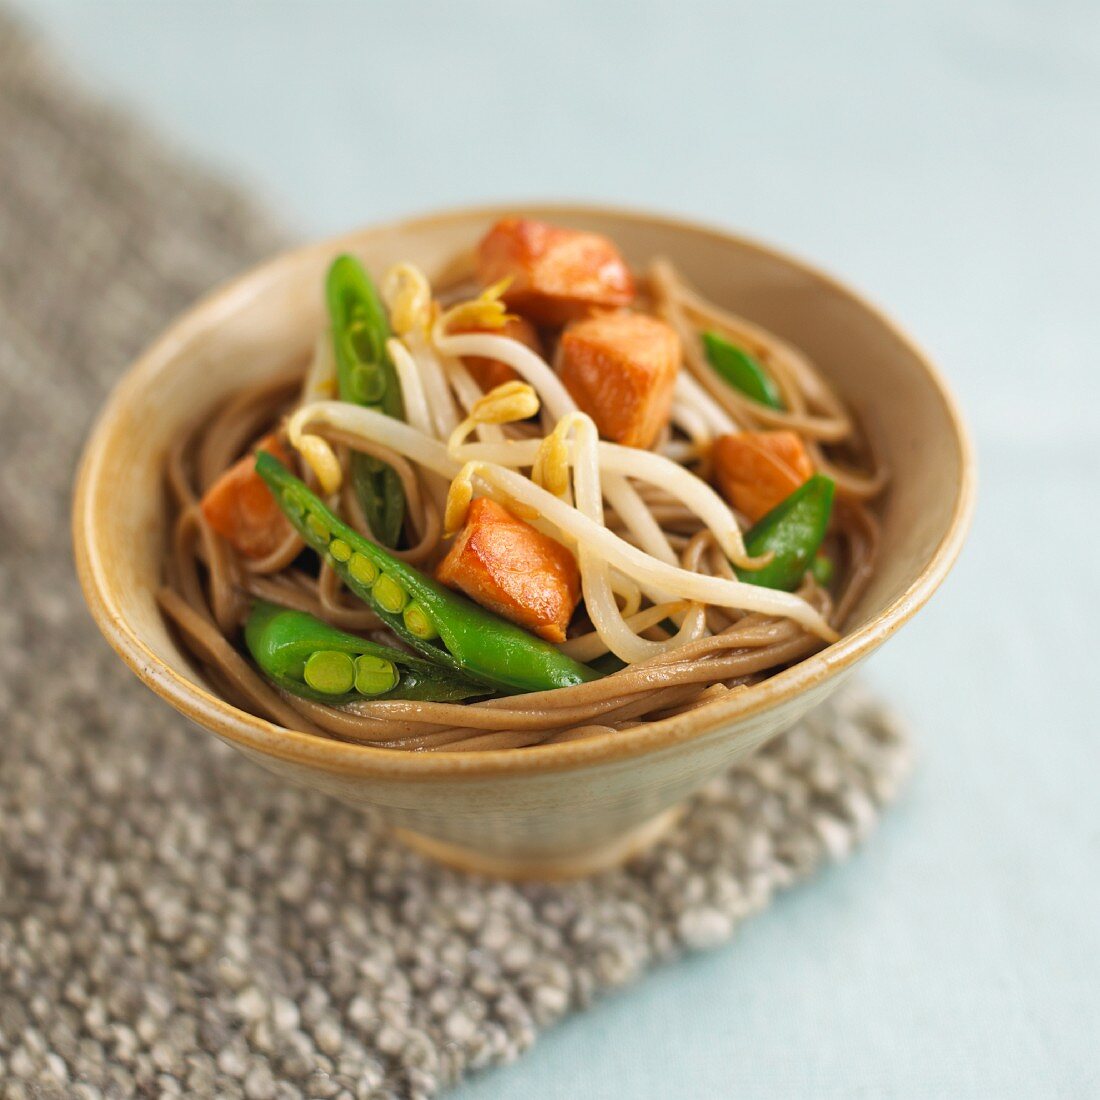 Teriyaki noodles with salmon, beansprouts and mange tout